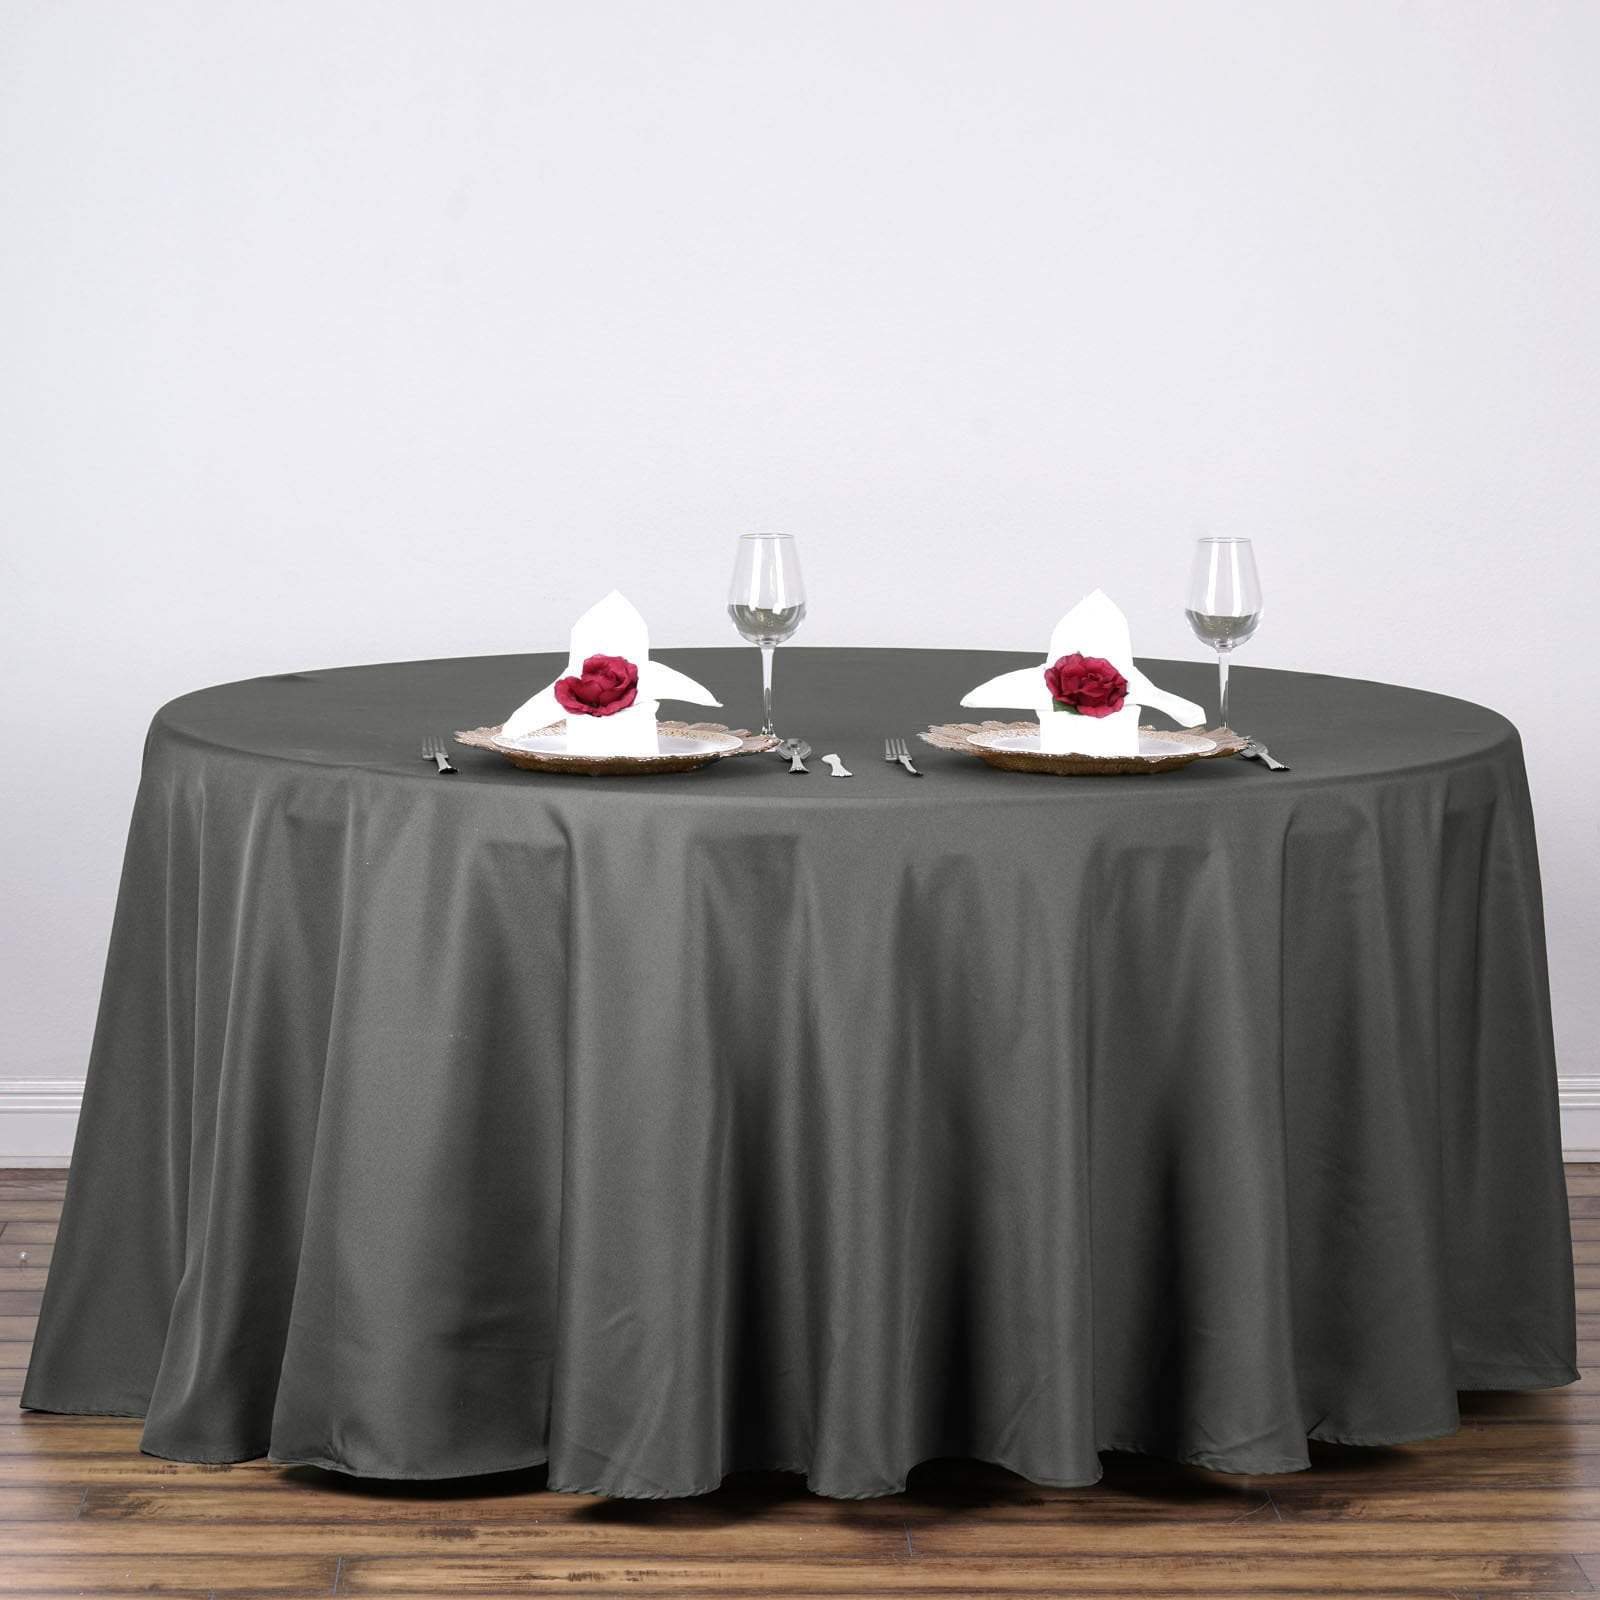 Efavormart 120 Whole Round, Grey Round Tablecloth